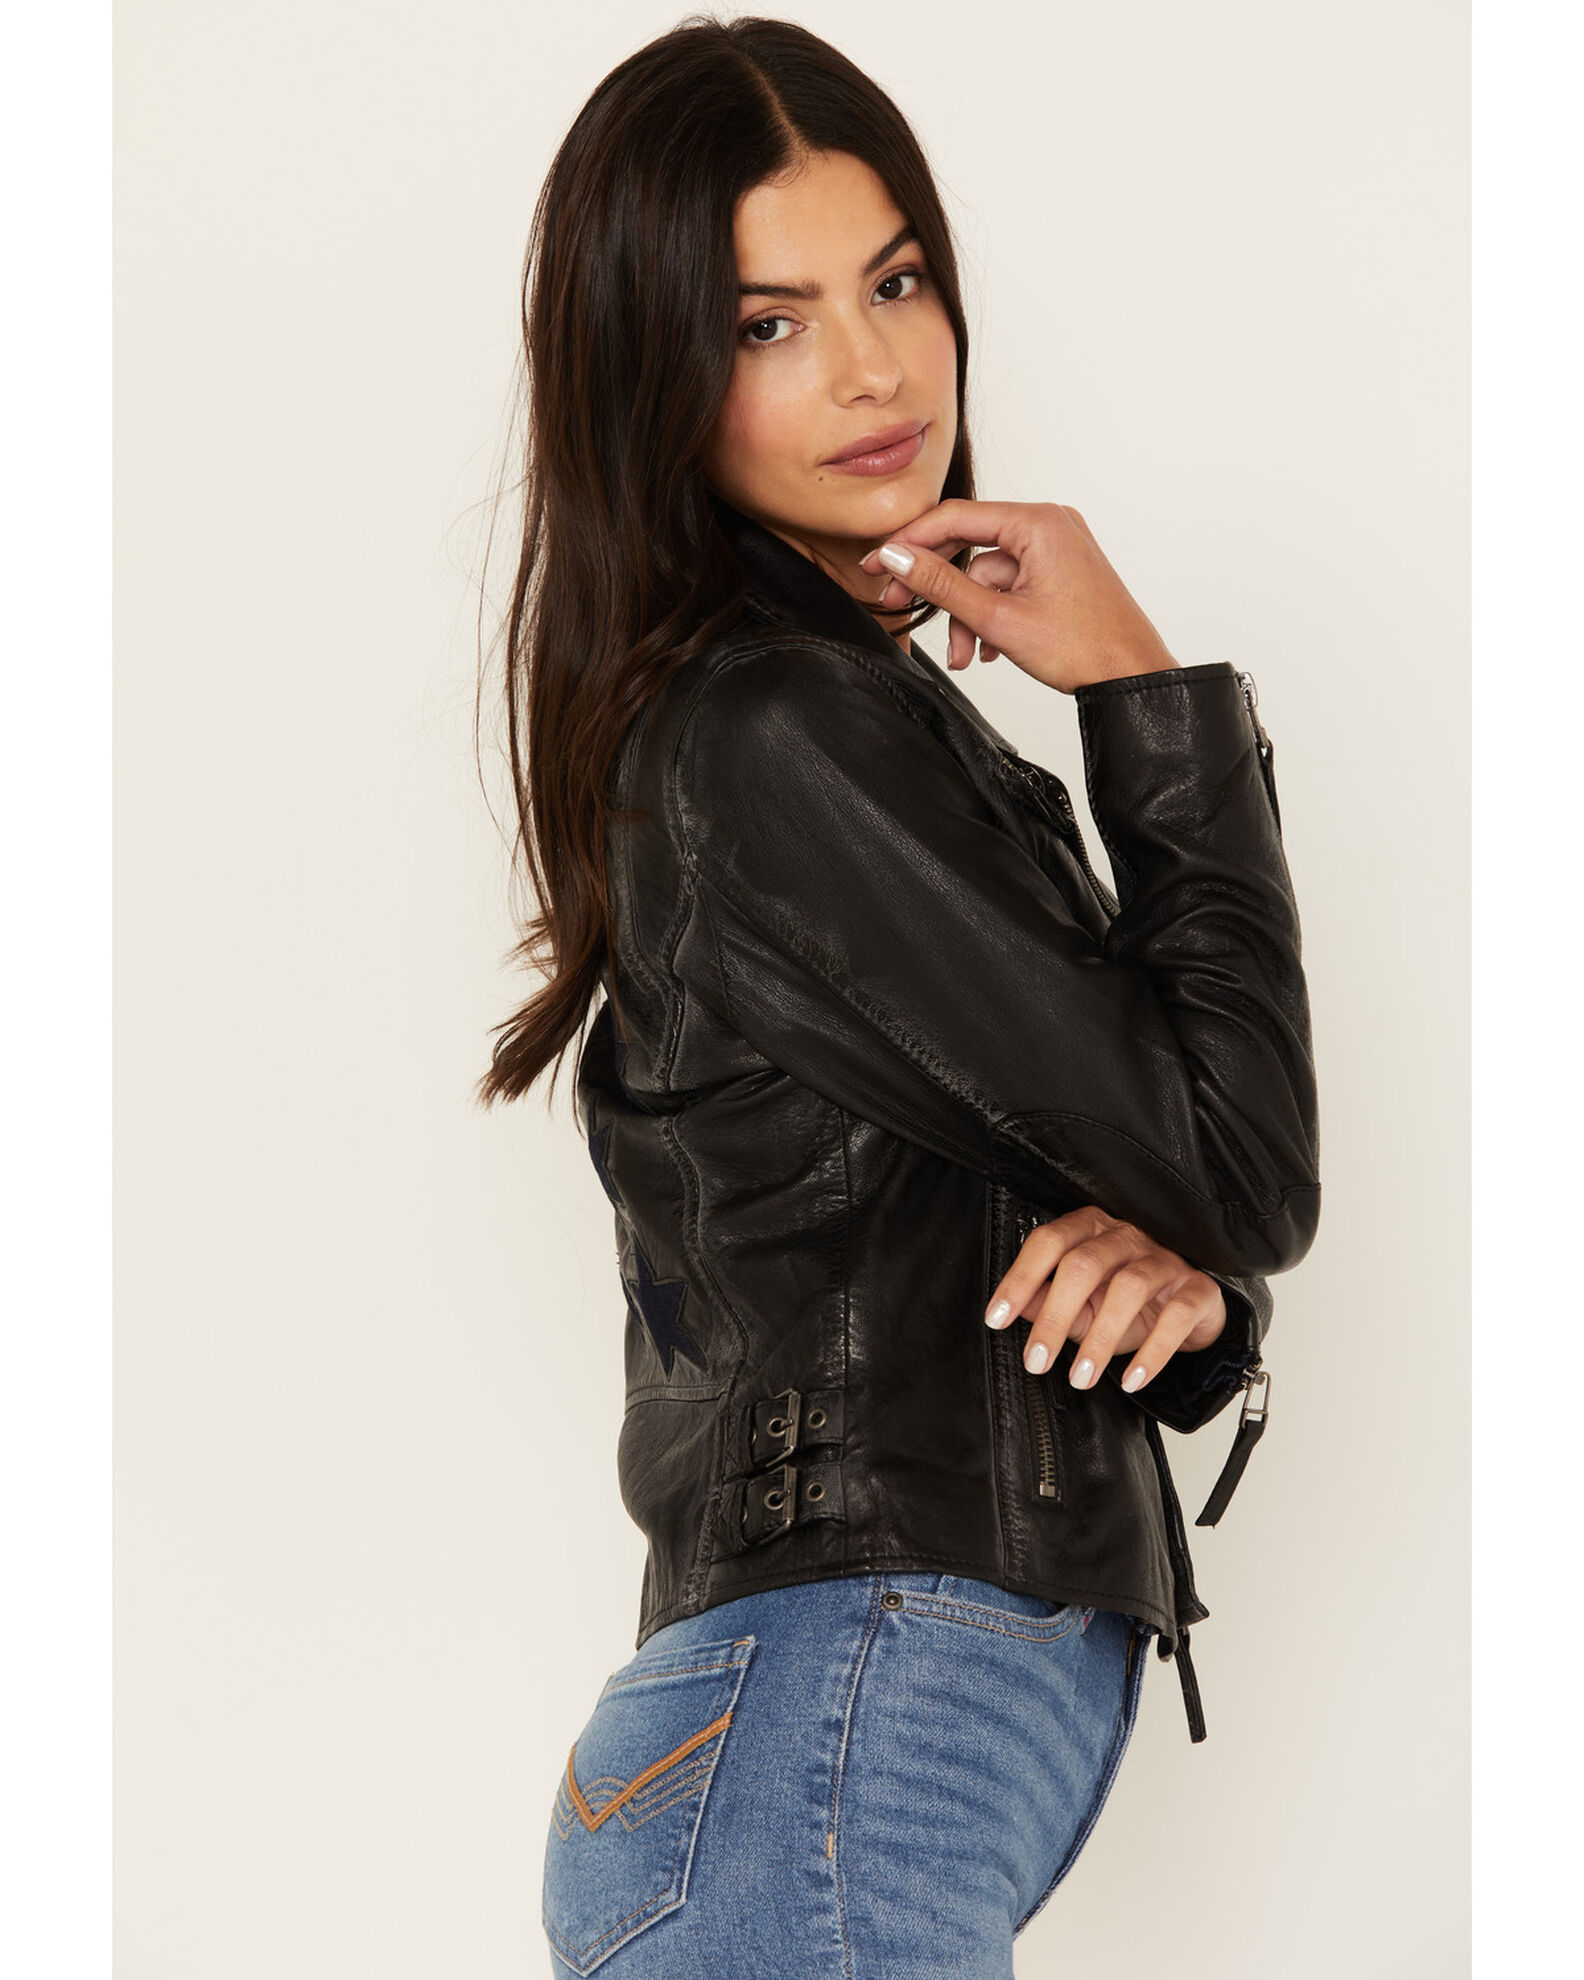 Product Name: Mauritius Women's Christy Scatter Star Leather Jacket